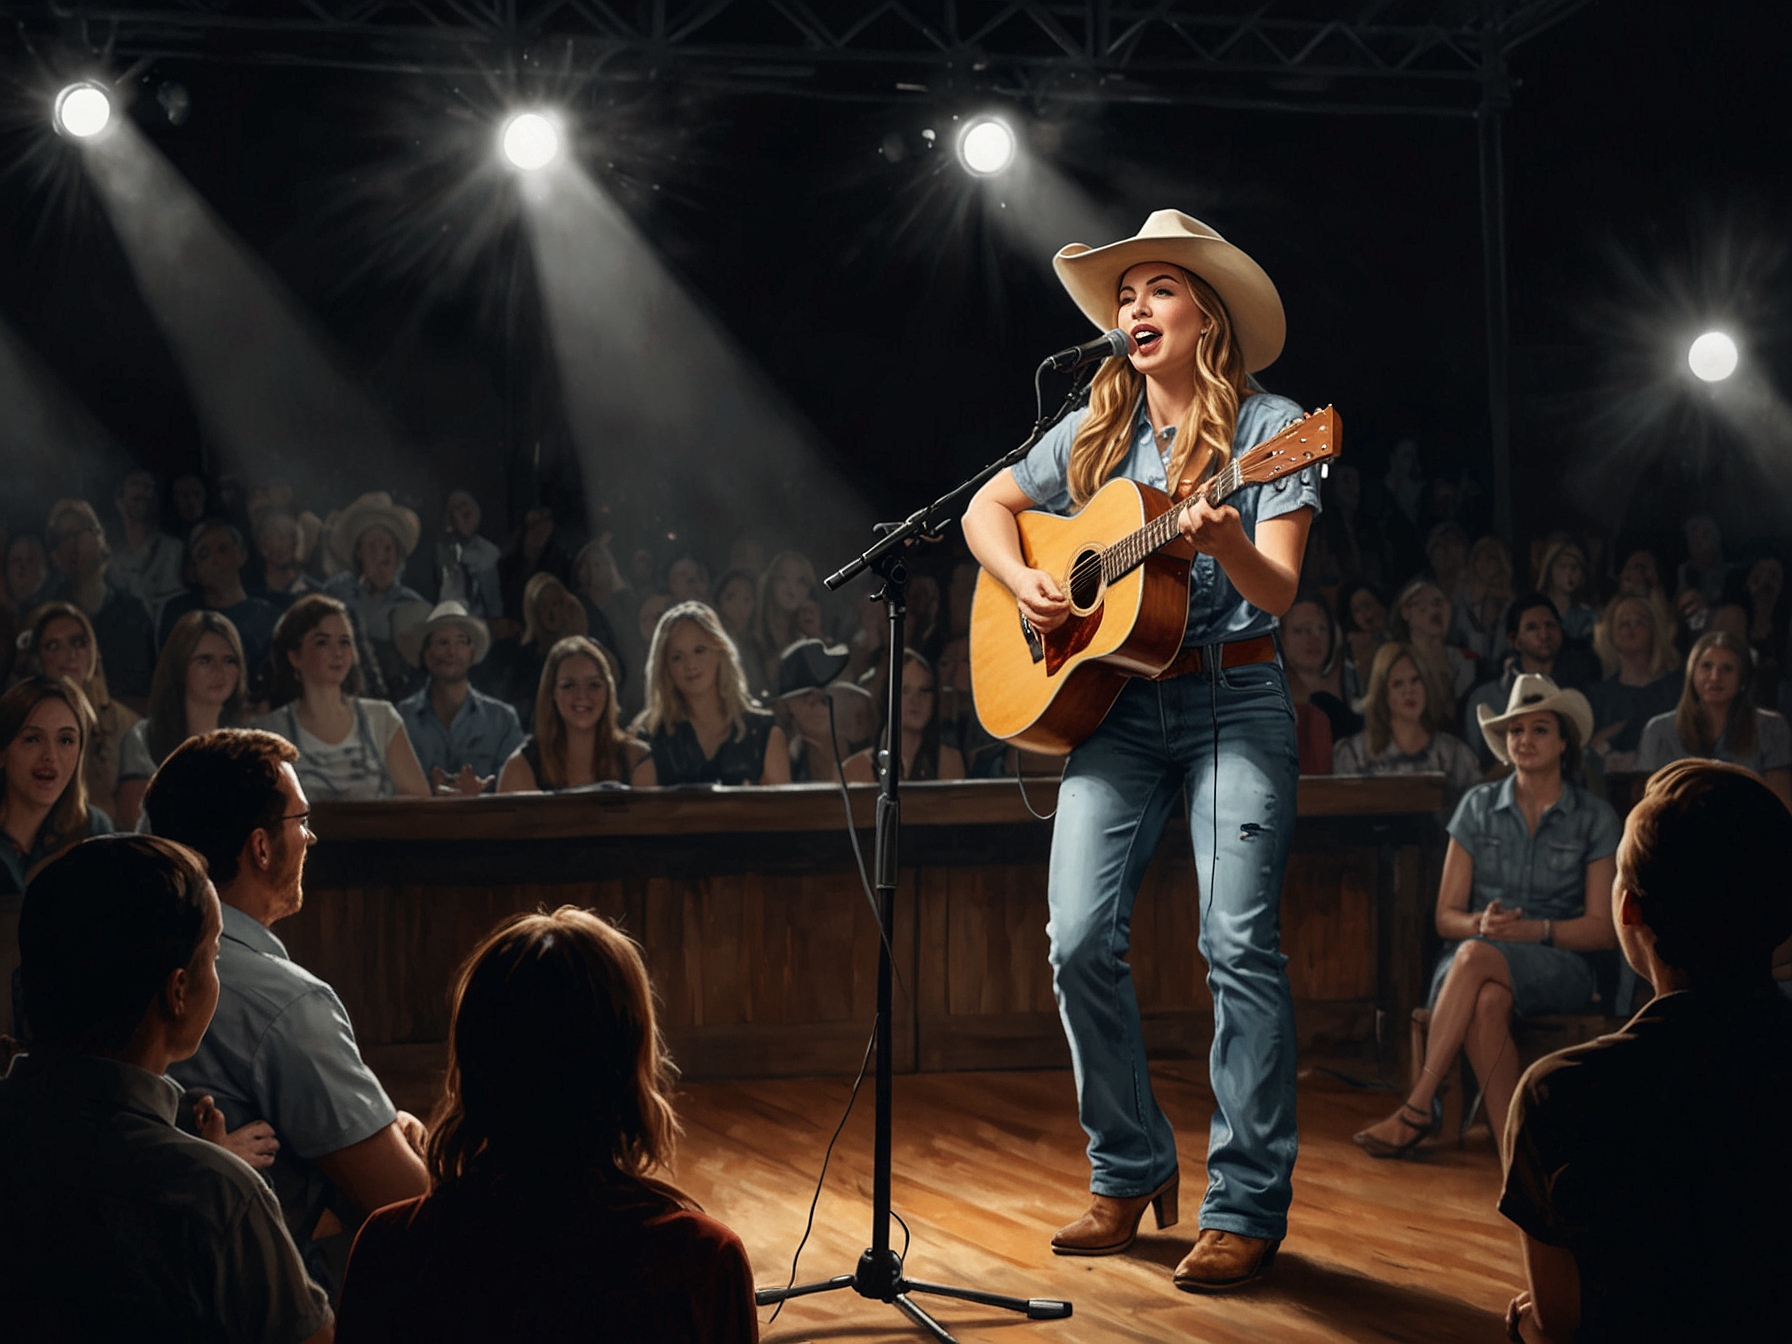 Tanner Adell performs her new single 'Cowboy Break My Heart' on stage, captivating the audience with her powerful vocals and emotional delivery.